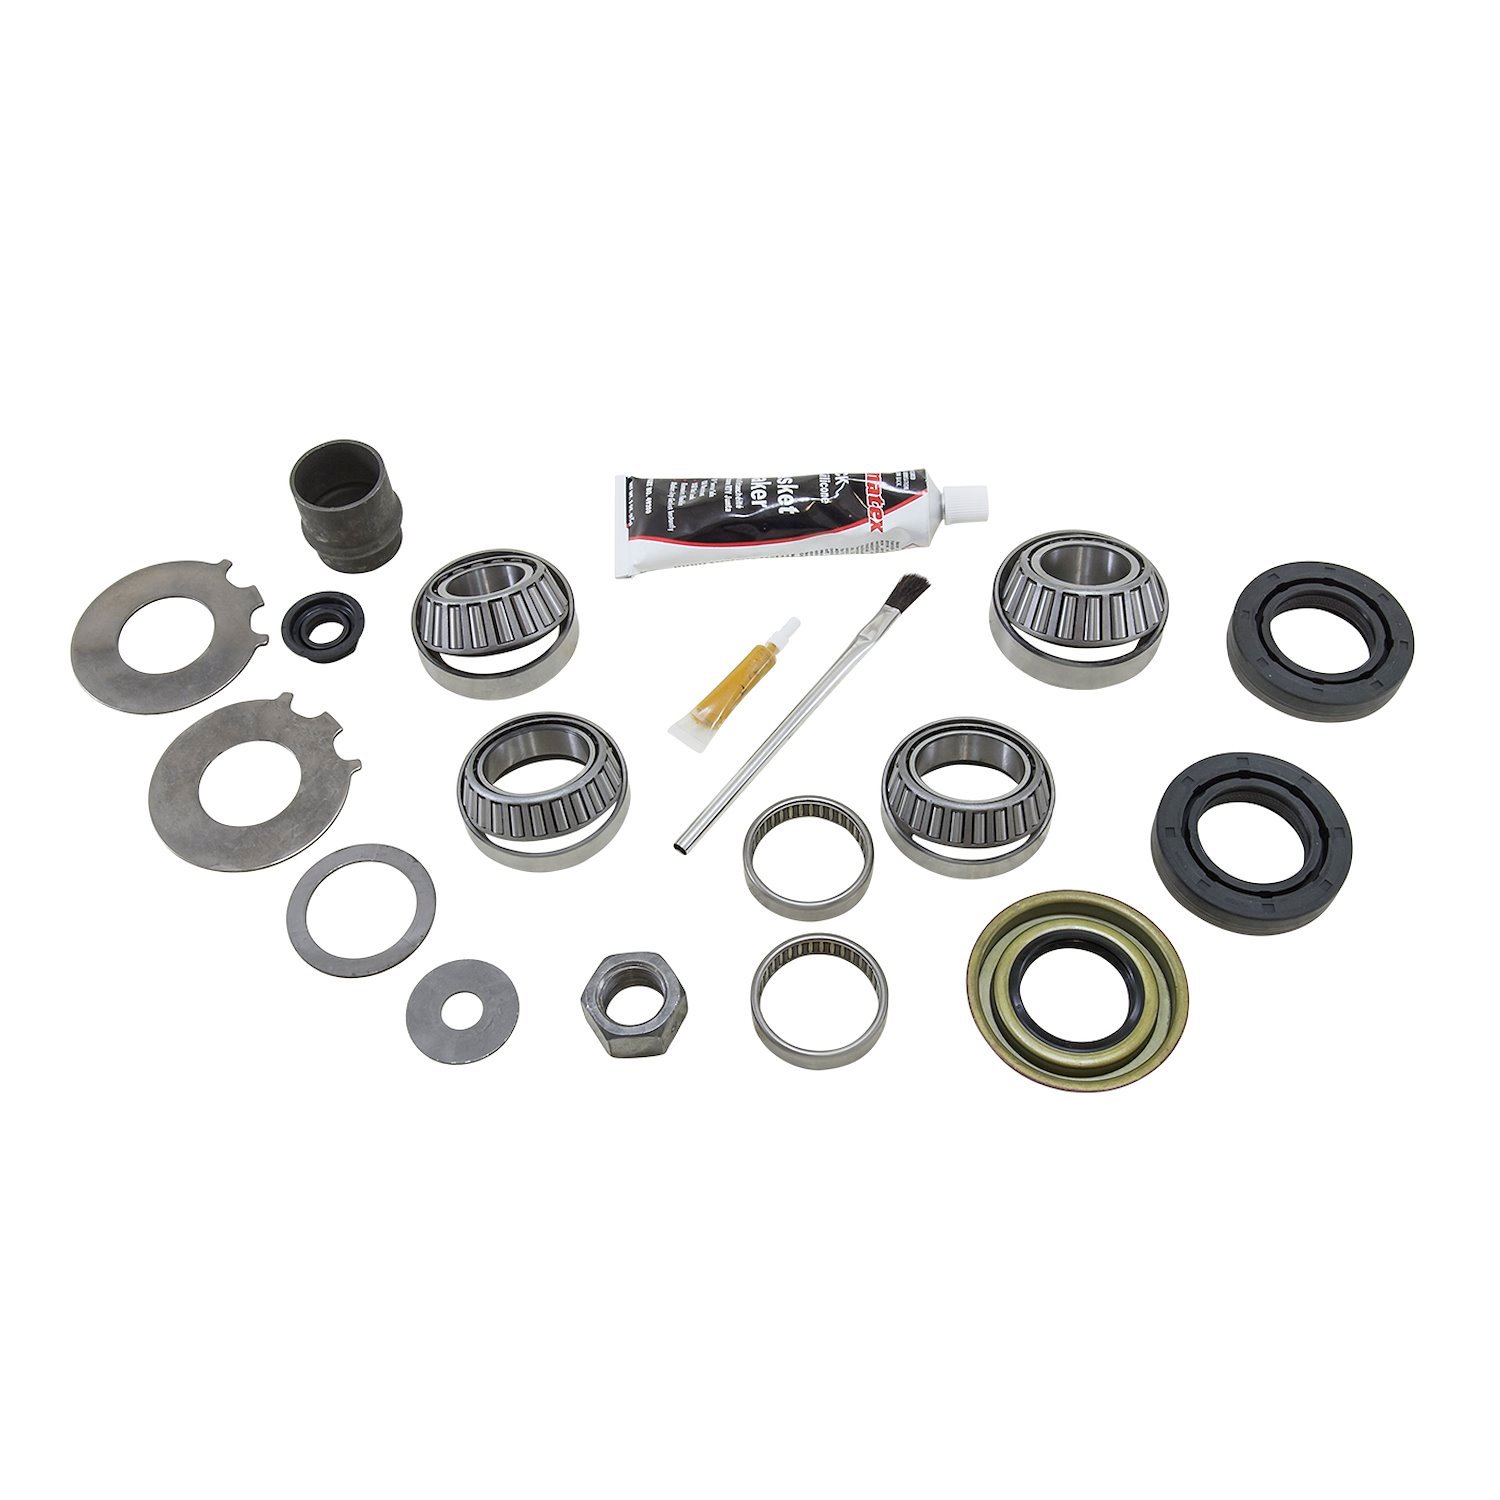 Bearing Install Kit For '98 And Newer GM S10 And S15 Ifs Differential